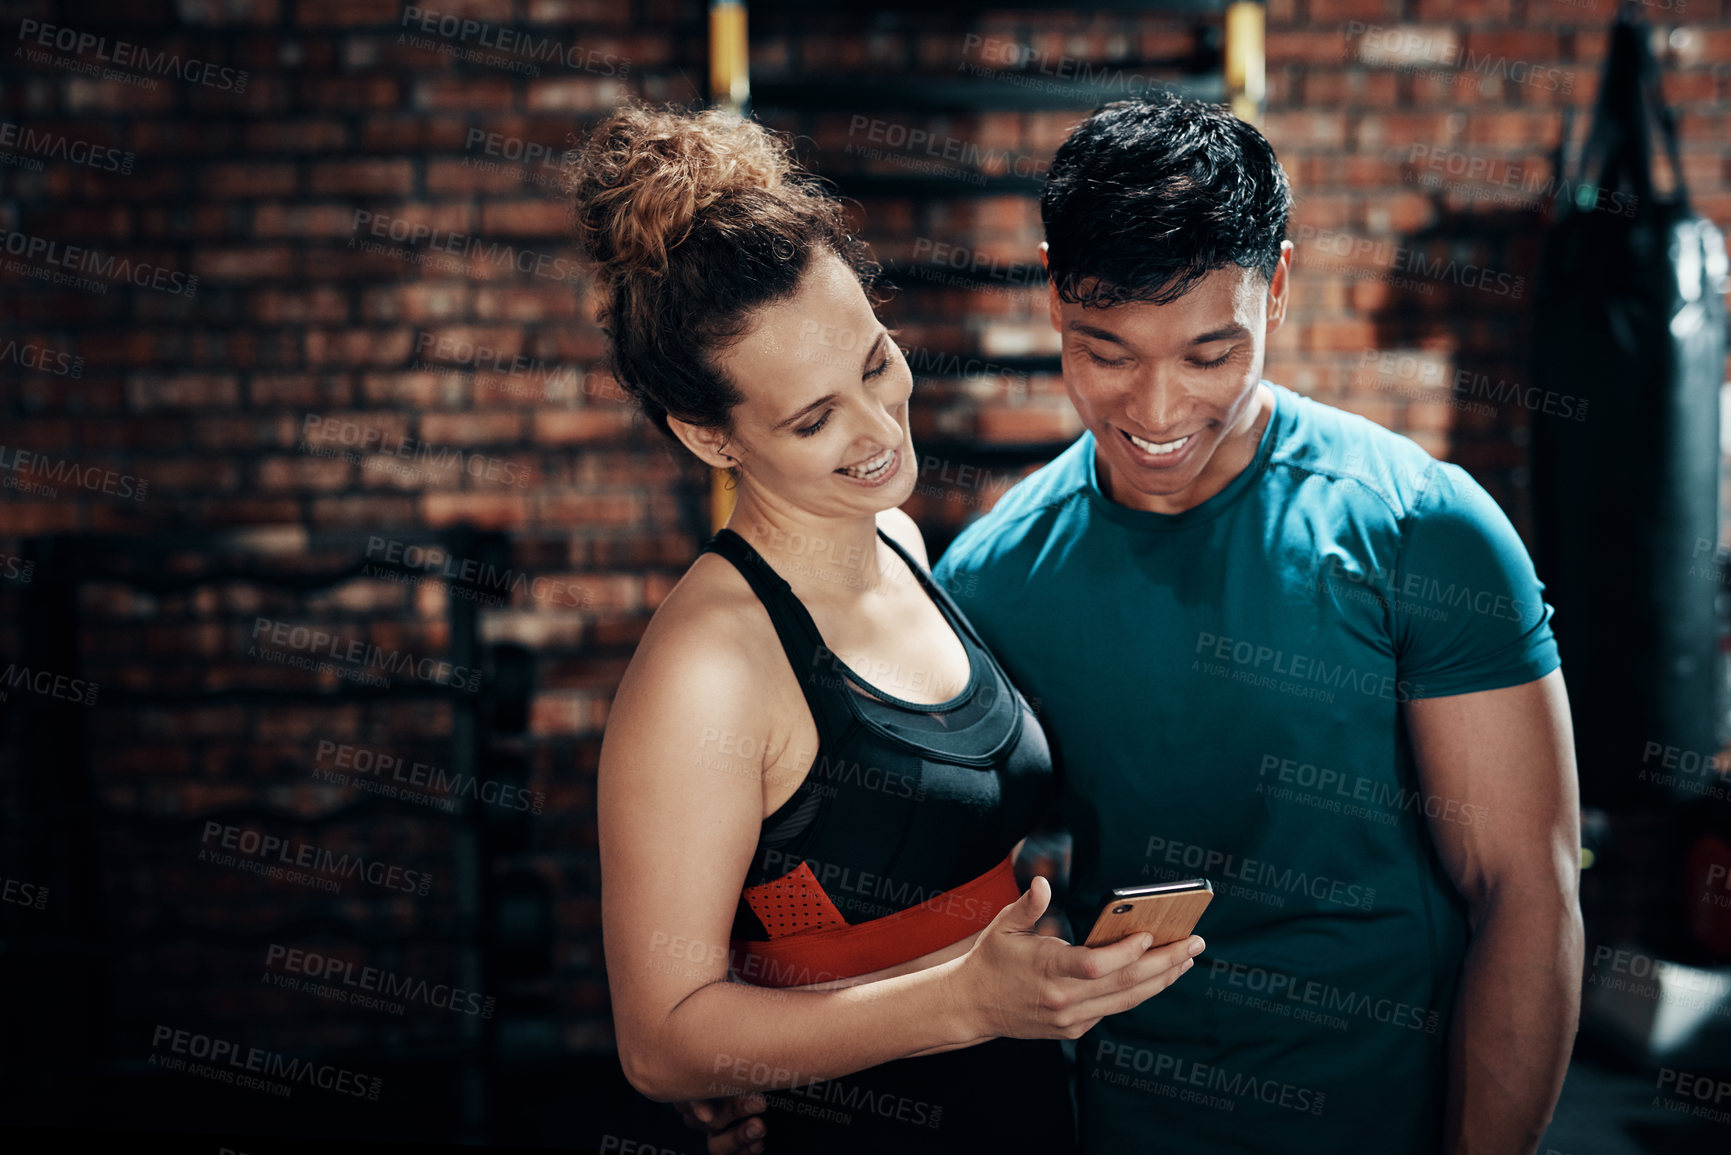 Buy stock photo Cropped shot of two young sportspeople using a smartphone together in a gym